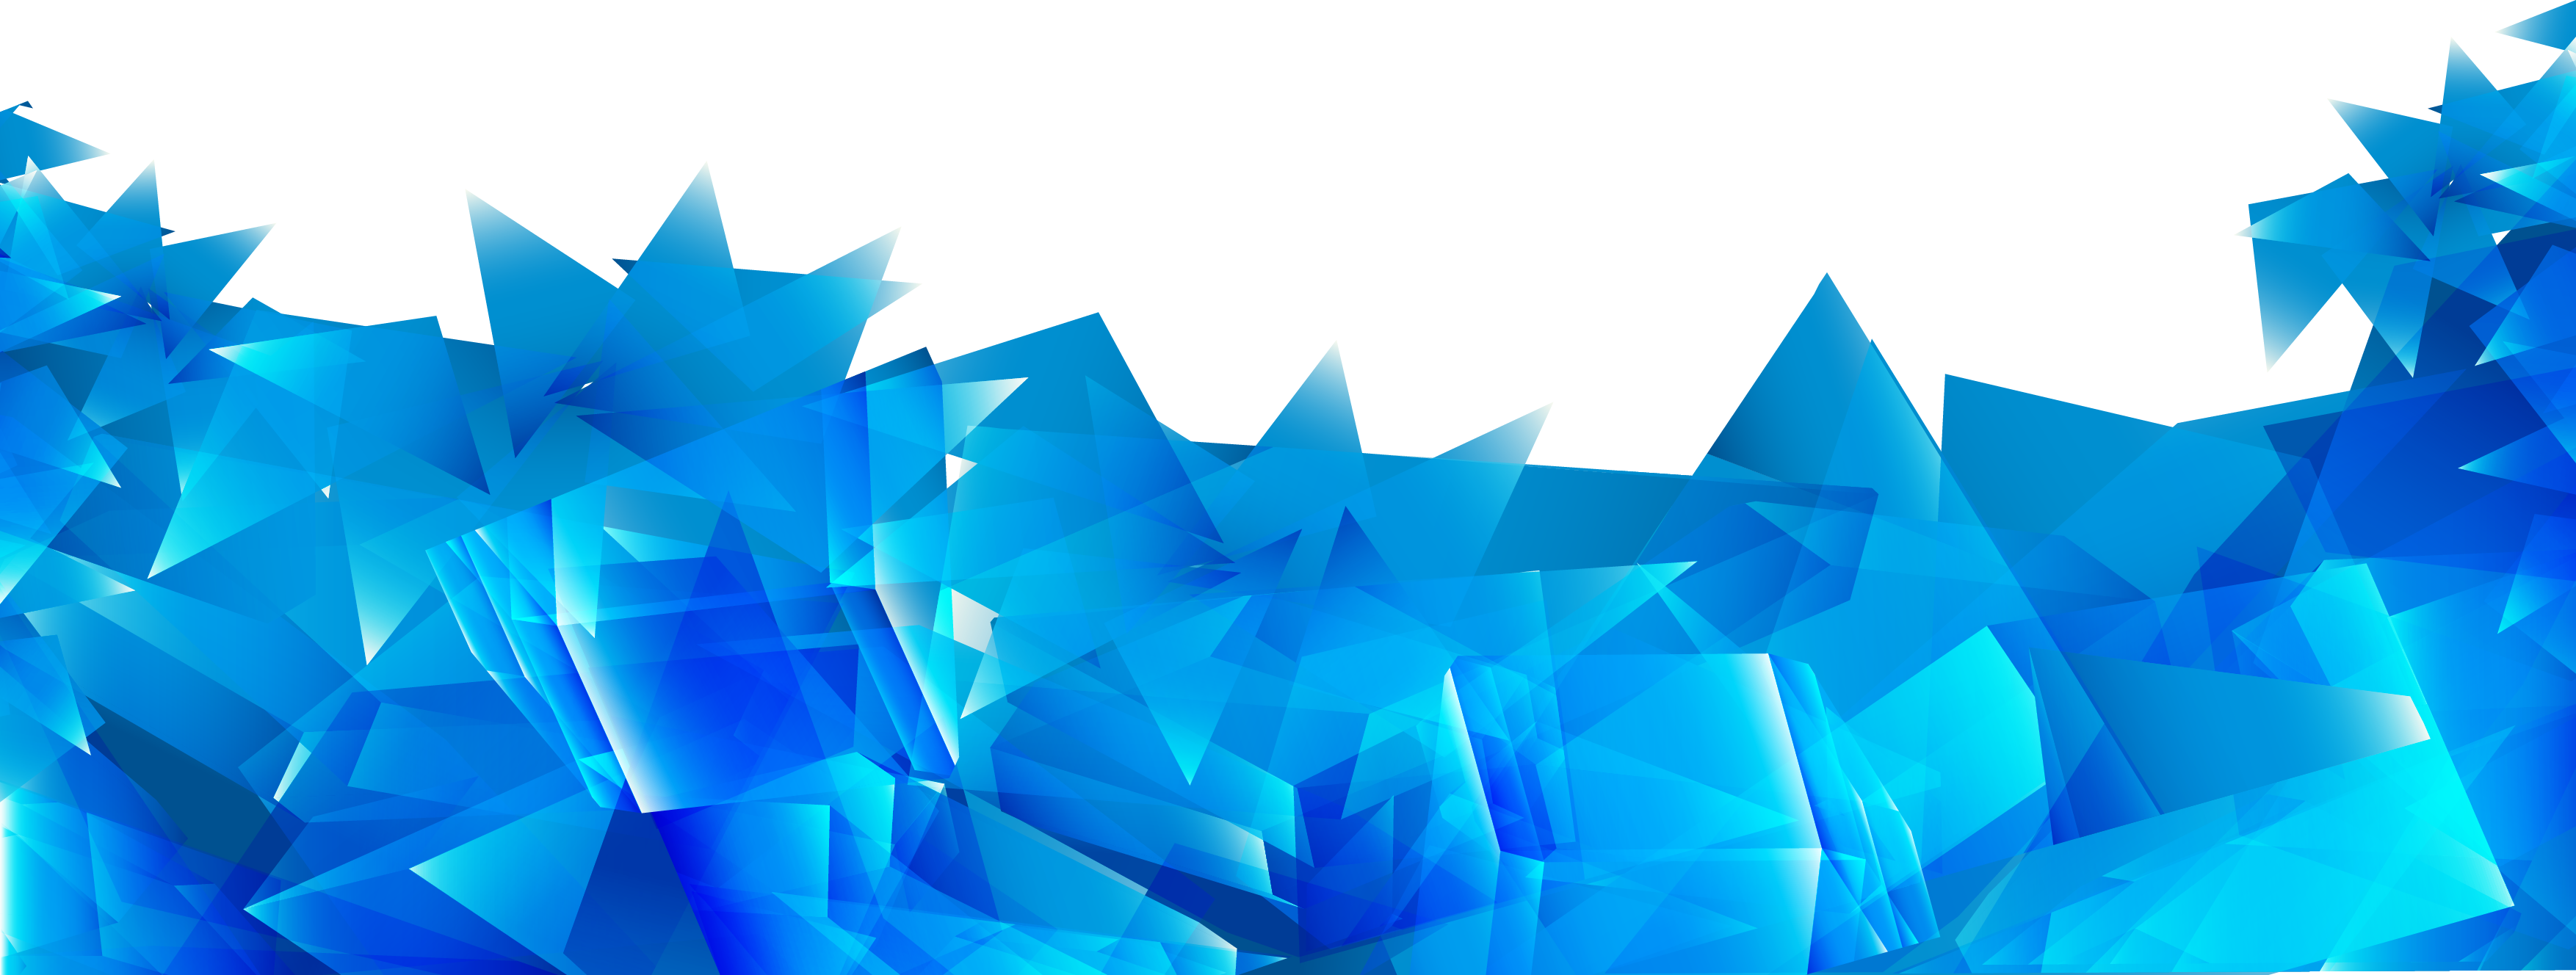 Blue Irregular Geometry Abstract Prism Vector Clipart